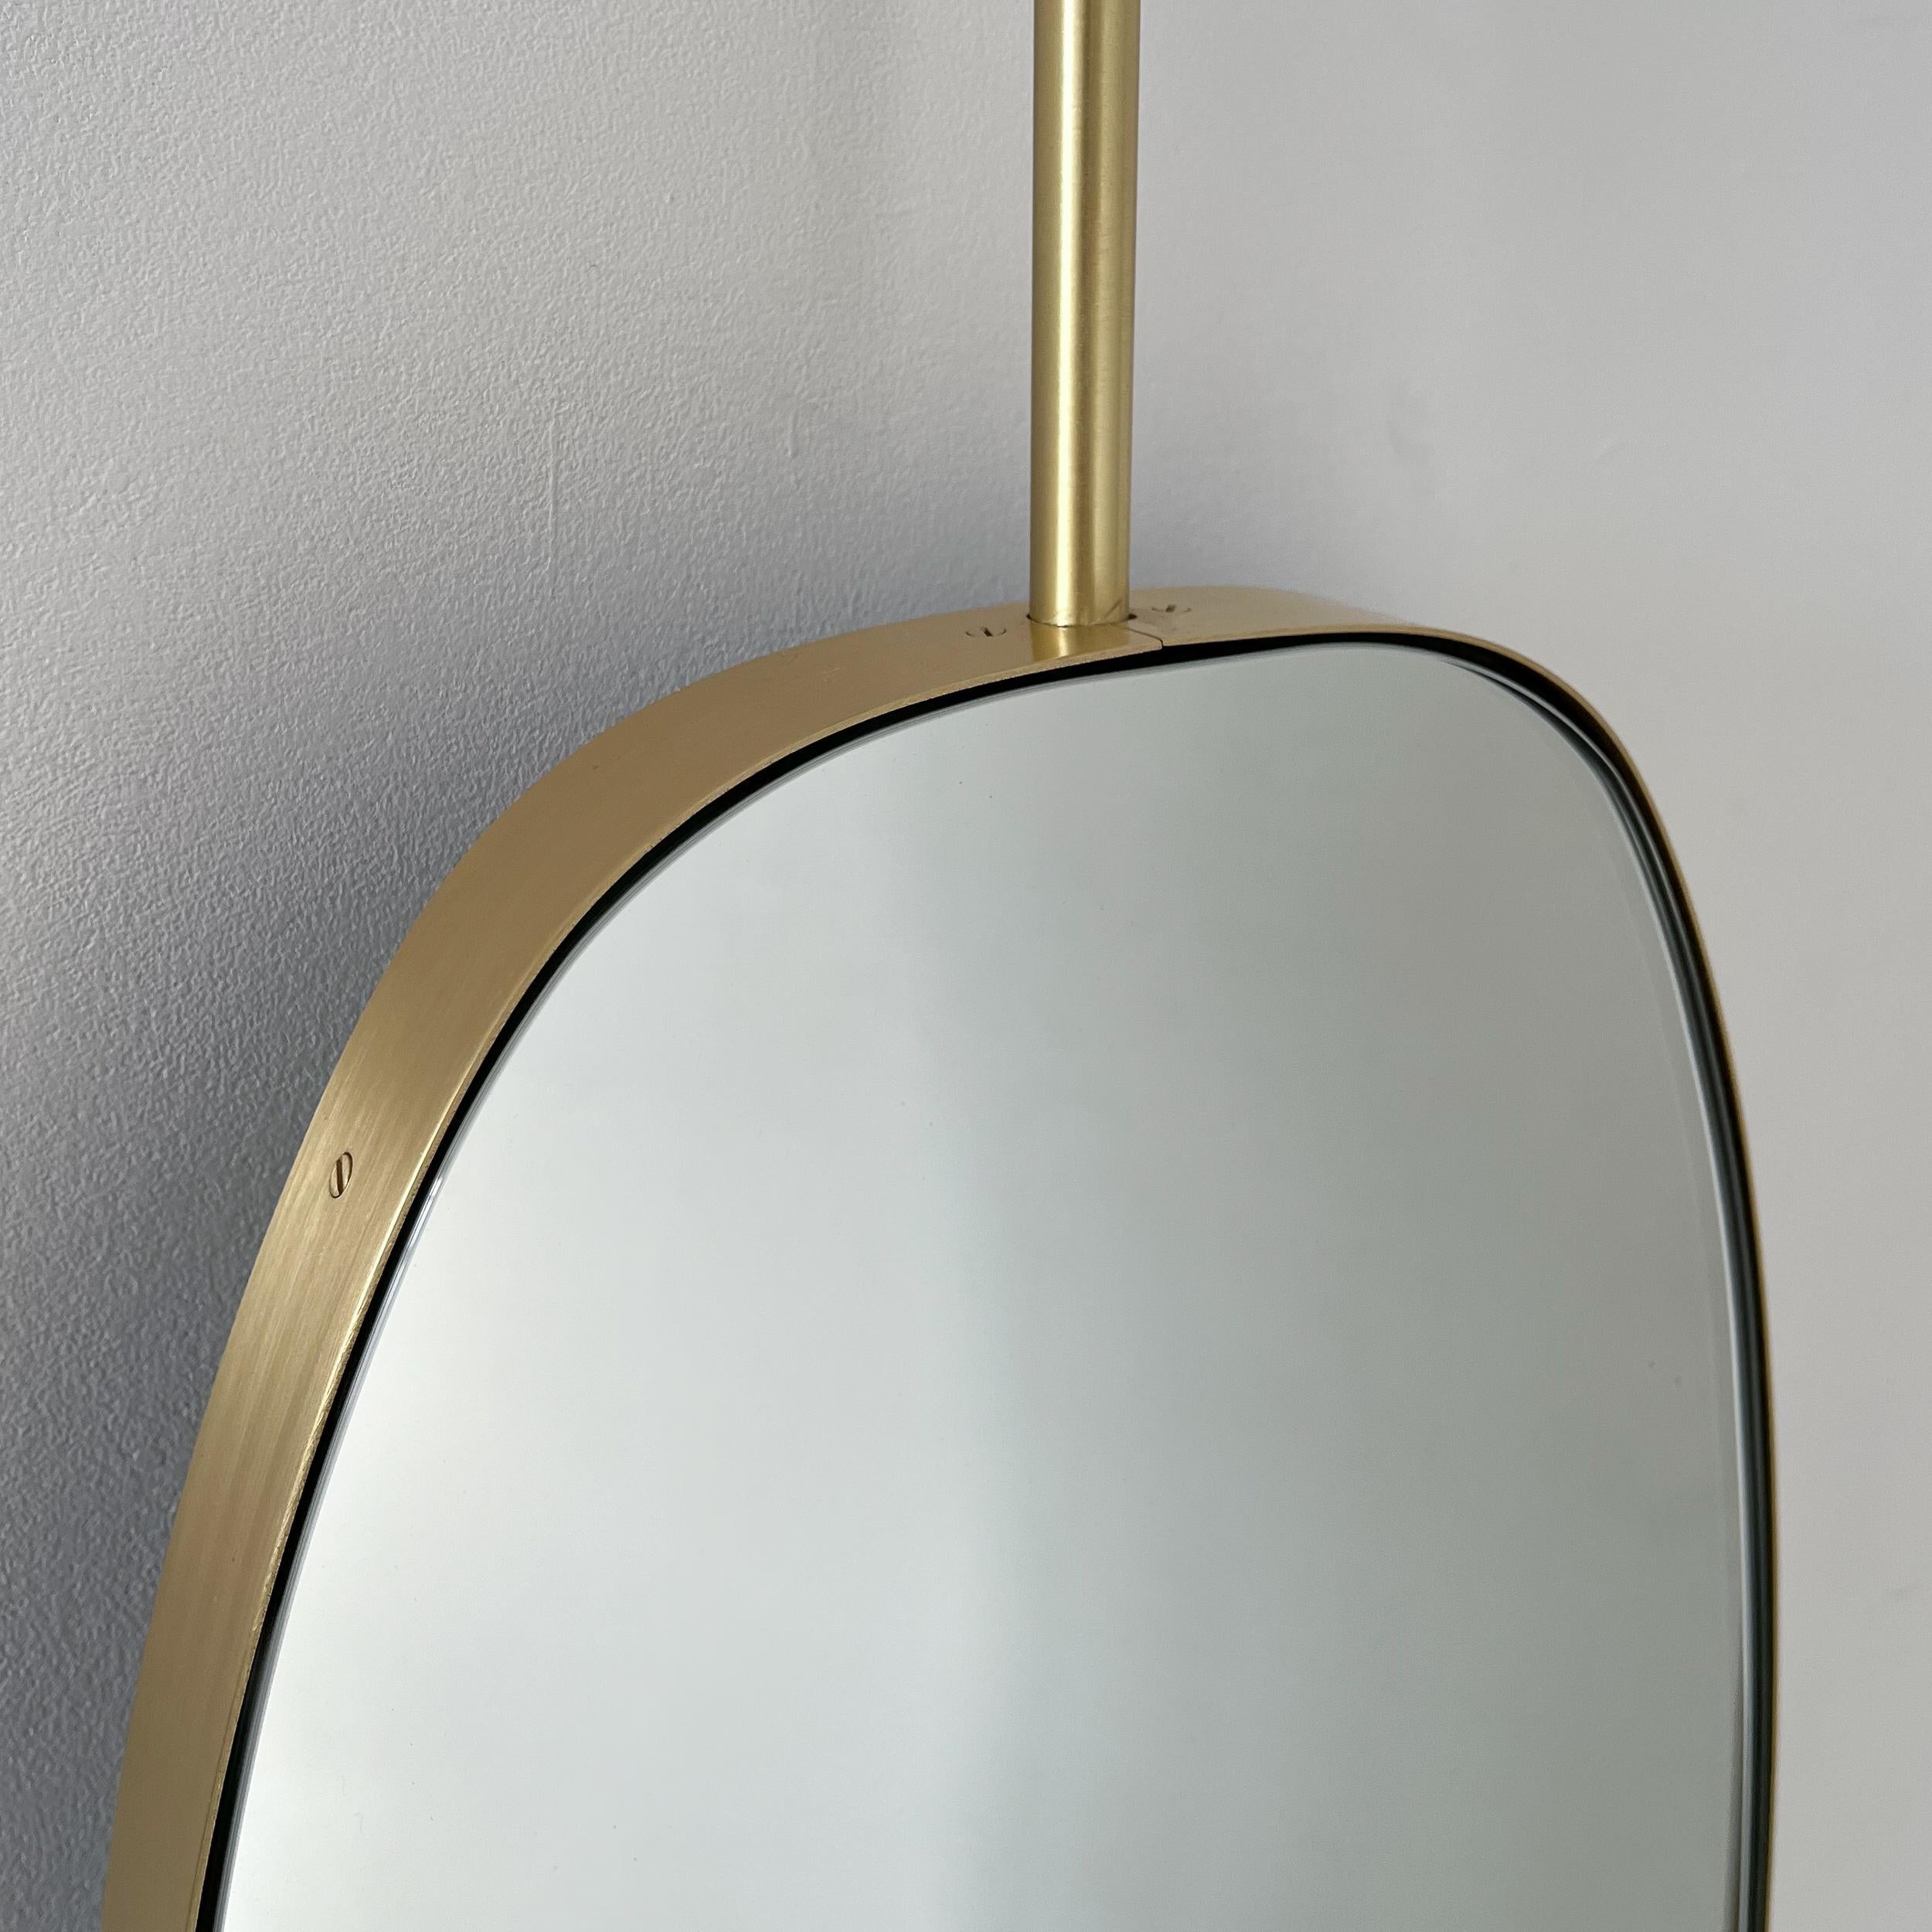 Brushed Art Deco Ceiling Suspended Organic Shaped Mirror with Brass Frame For Sale